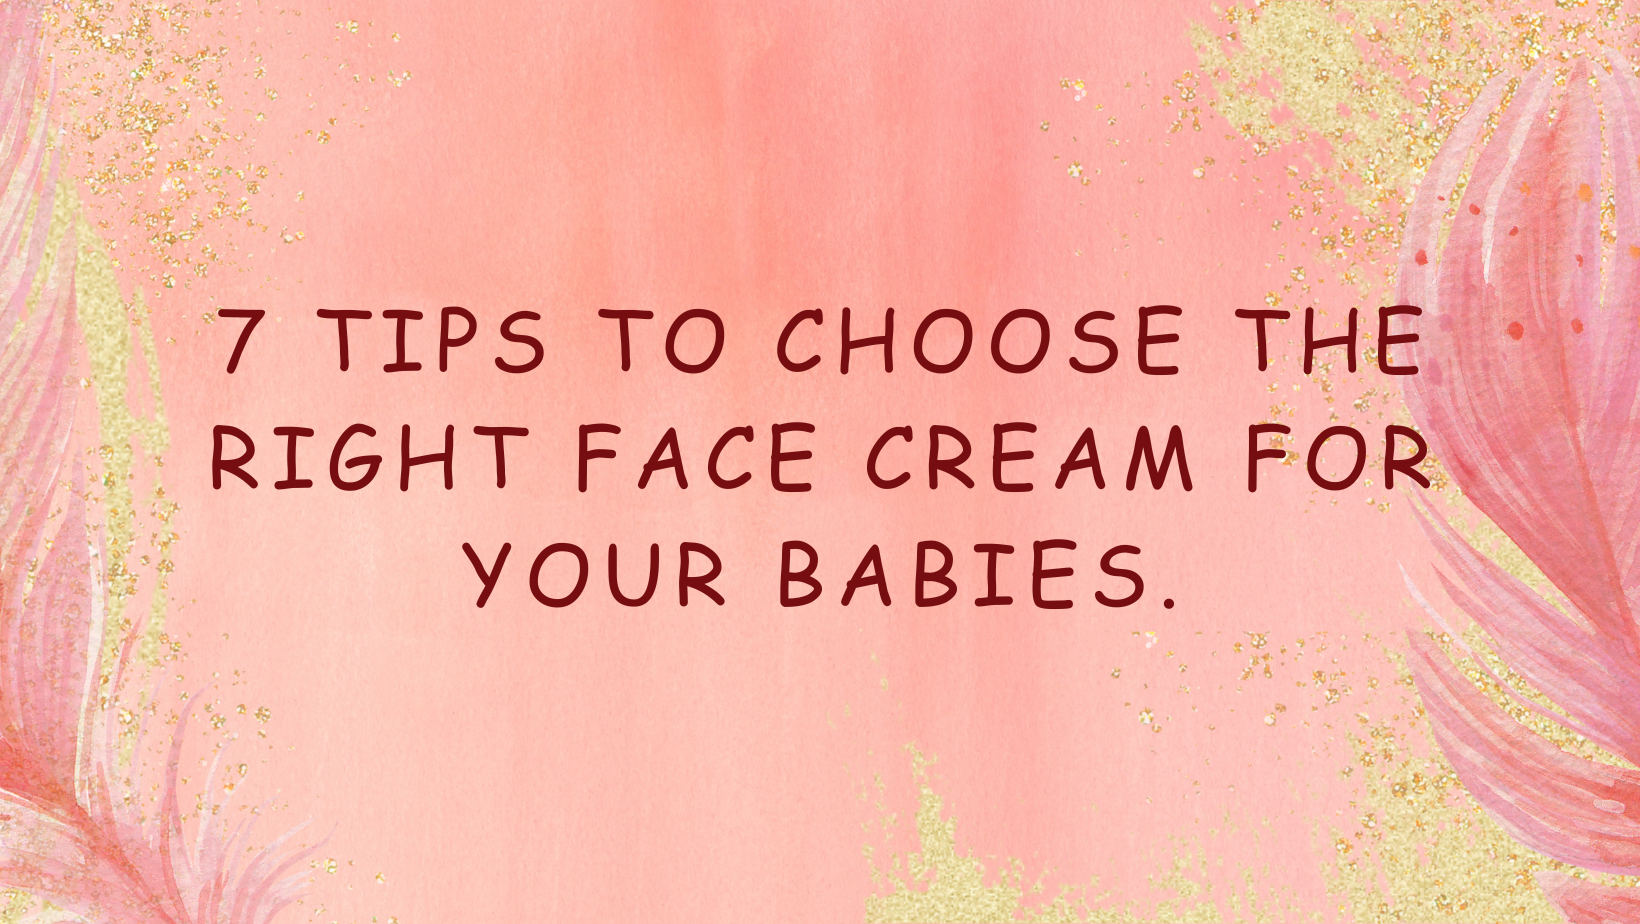 7 Tips to Choose the Right Face Cream for Newborn